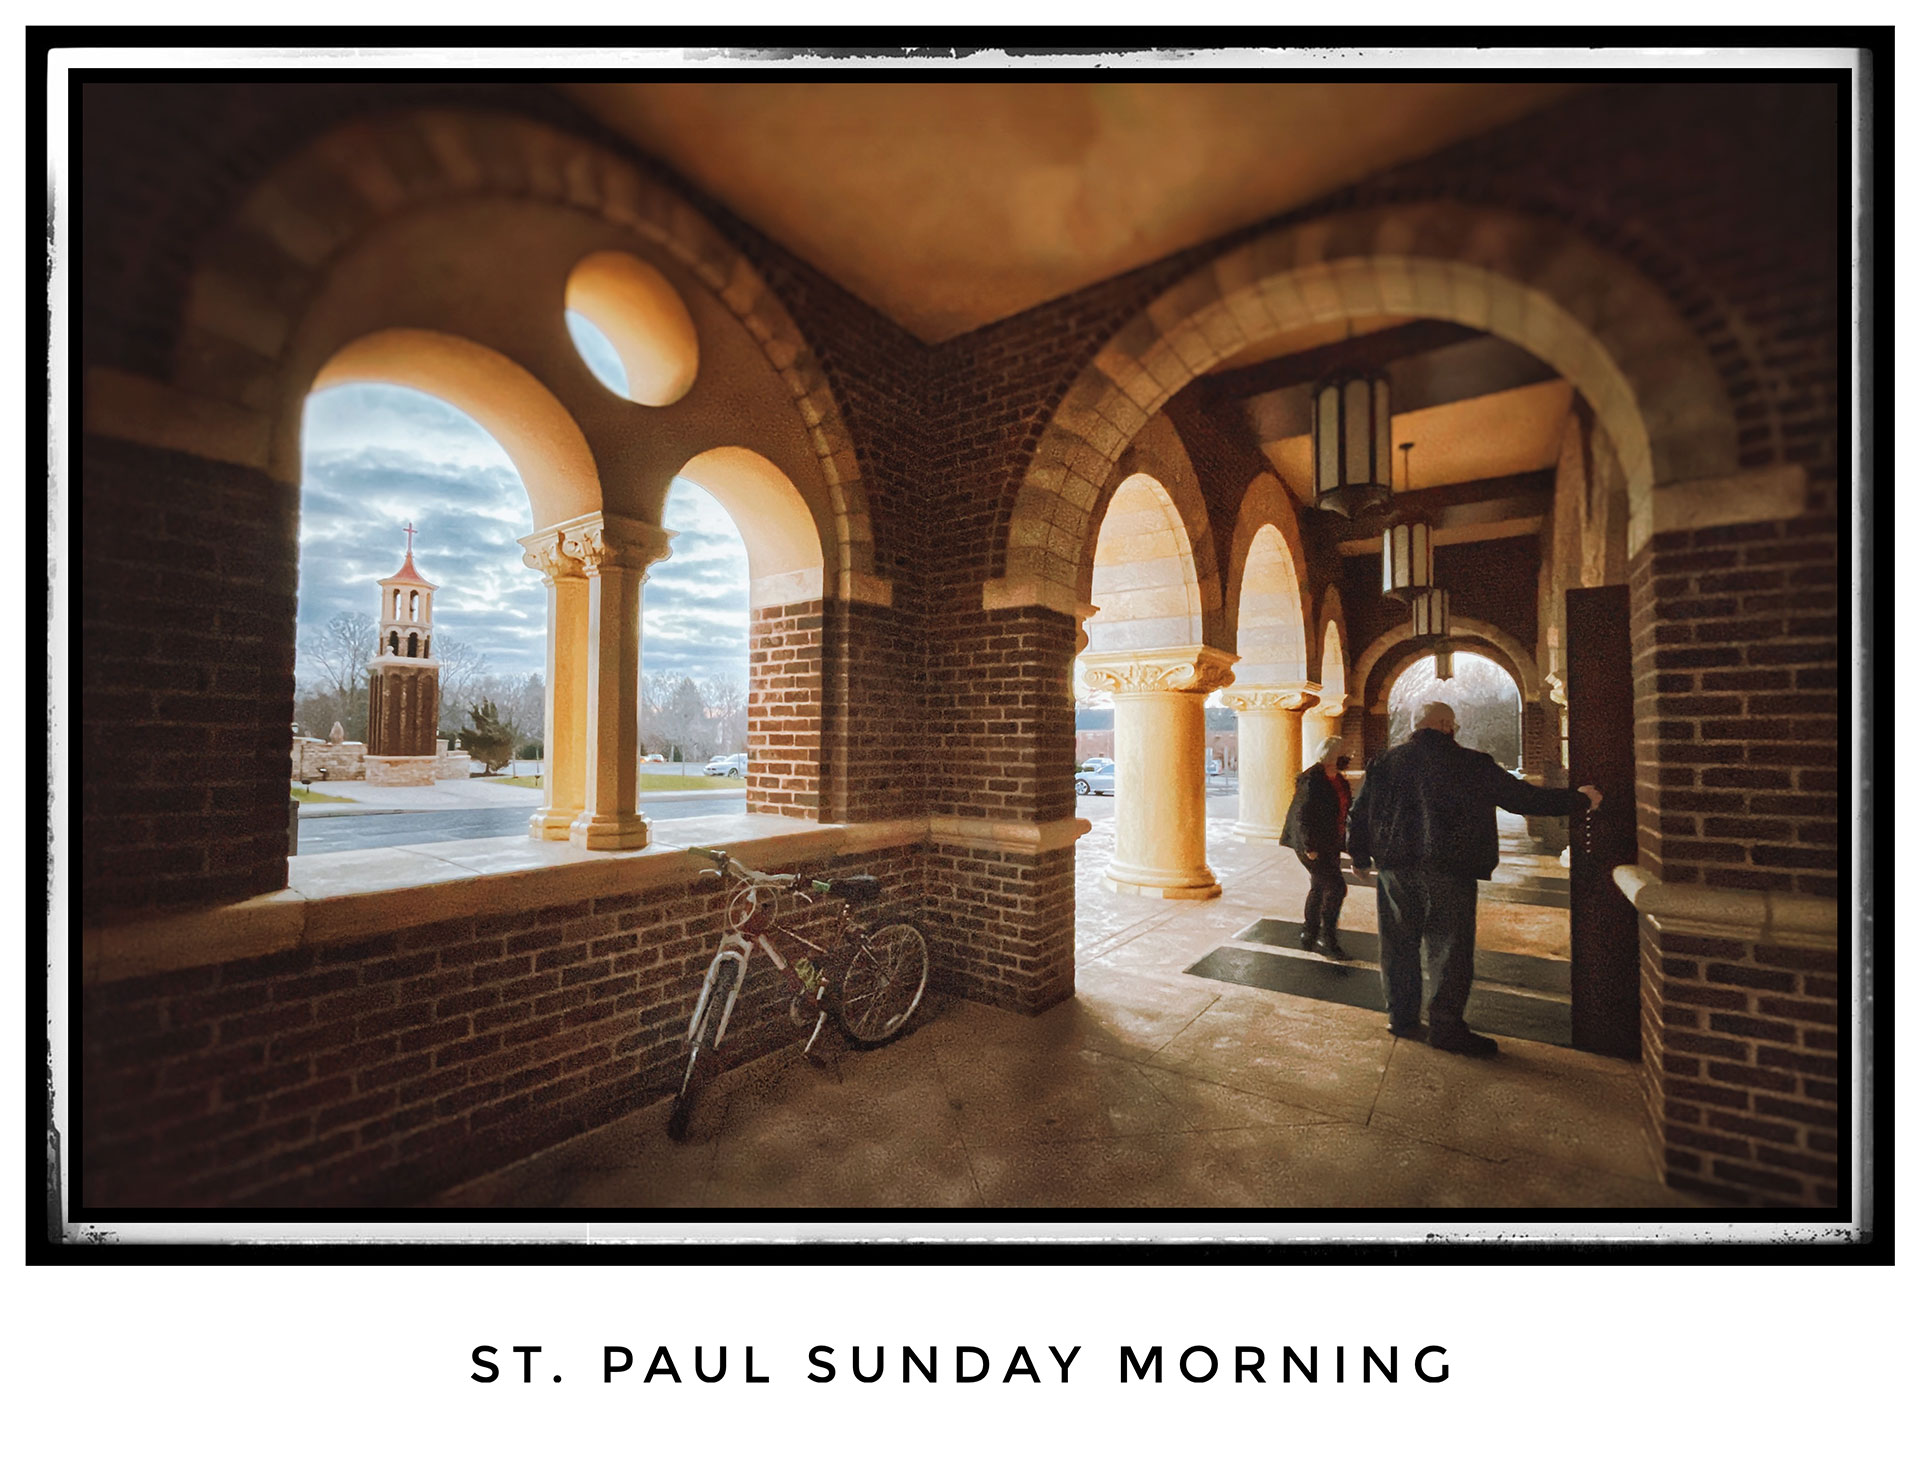 A parishioner's bicycle leans against the wall of the portico of St. Paul the Apostle Catholic Church as two more parishioners arrive for Sunday Mass. My Final Photo for Dec. 26, 2021.